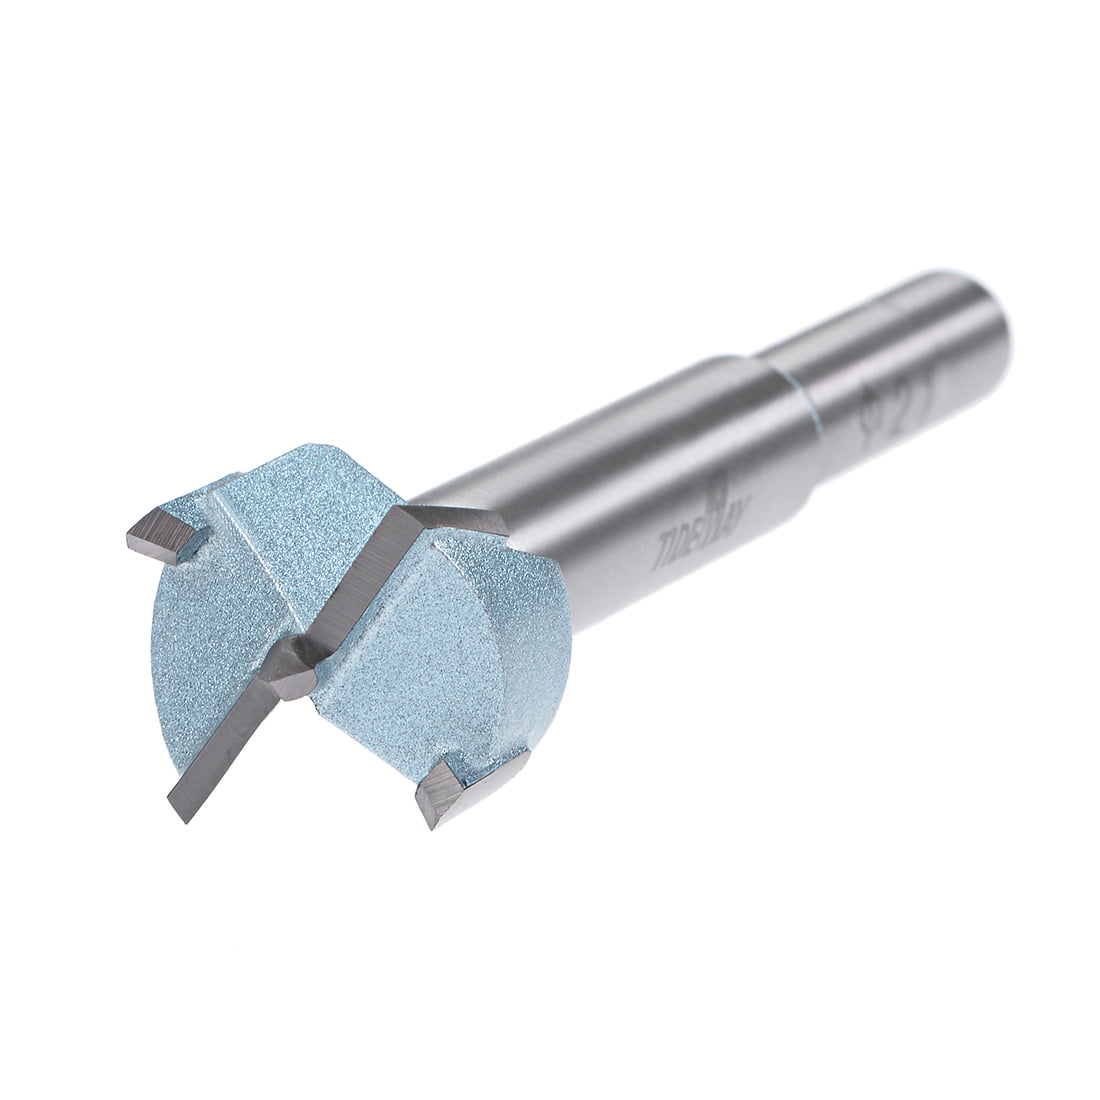 21mm drill with hinge and hole punch with 8mm round shank 